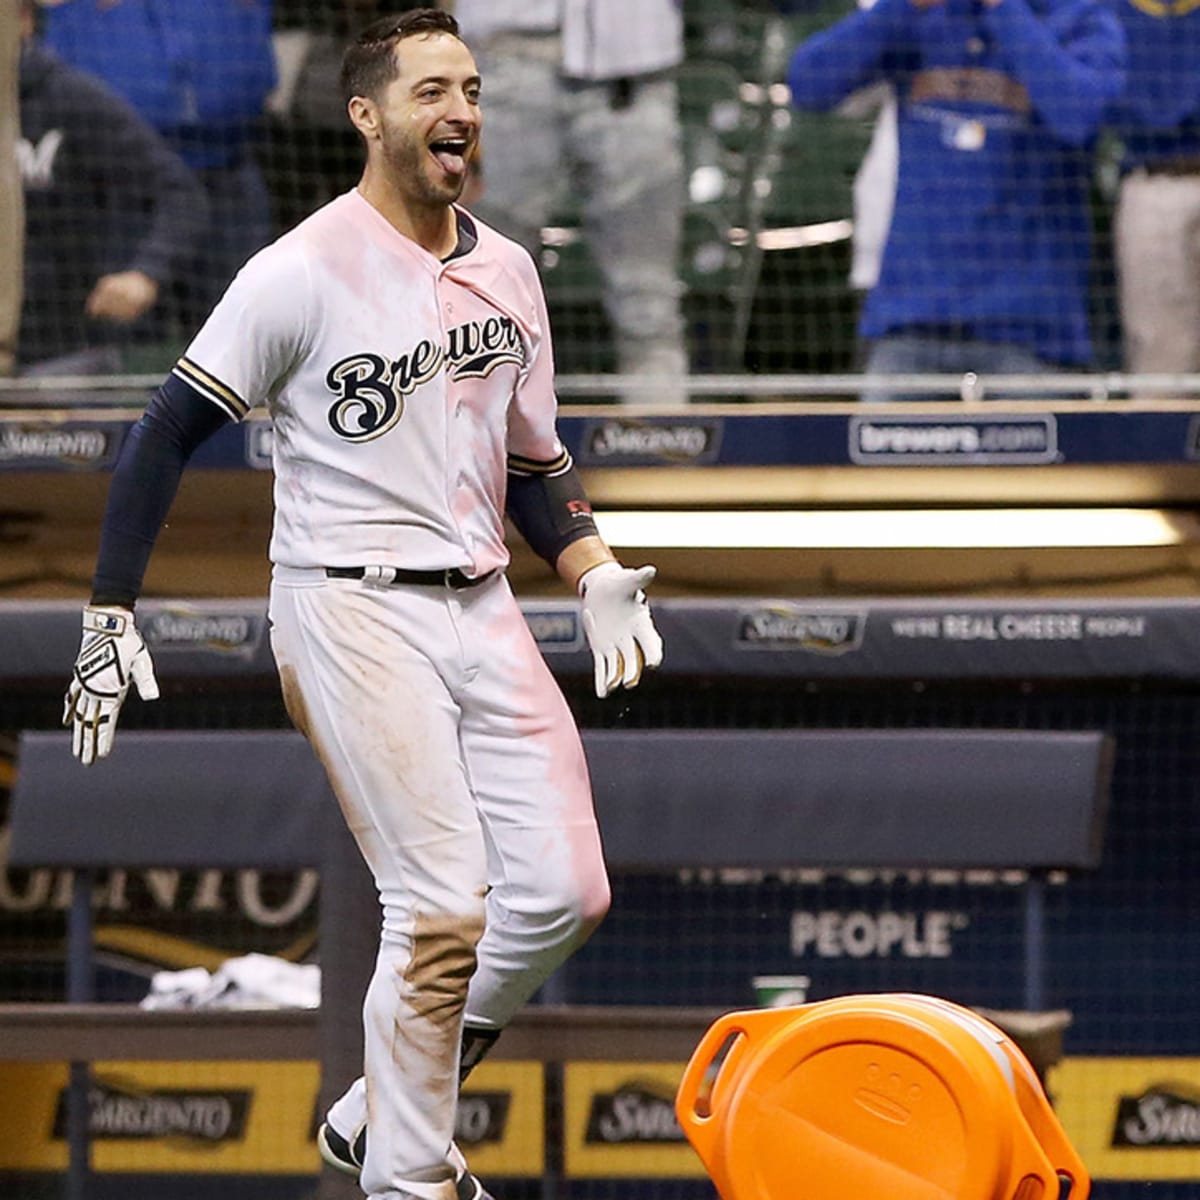 Brewers' Ryan Braun pays homage to Christian Yelich with home run